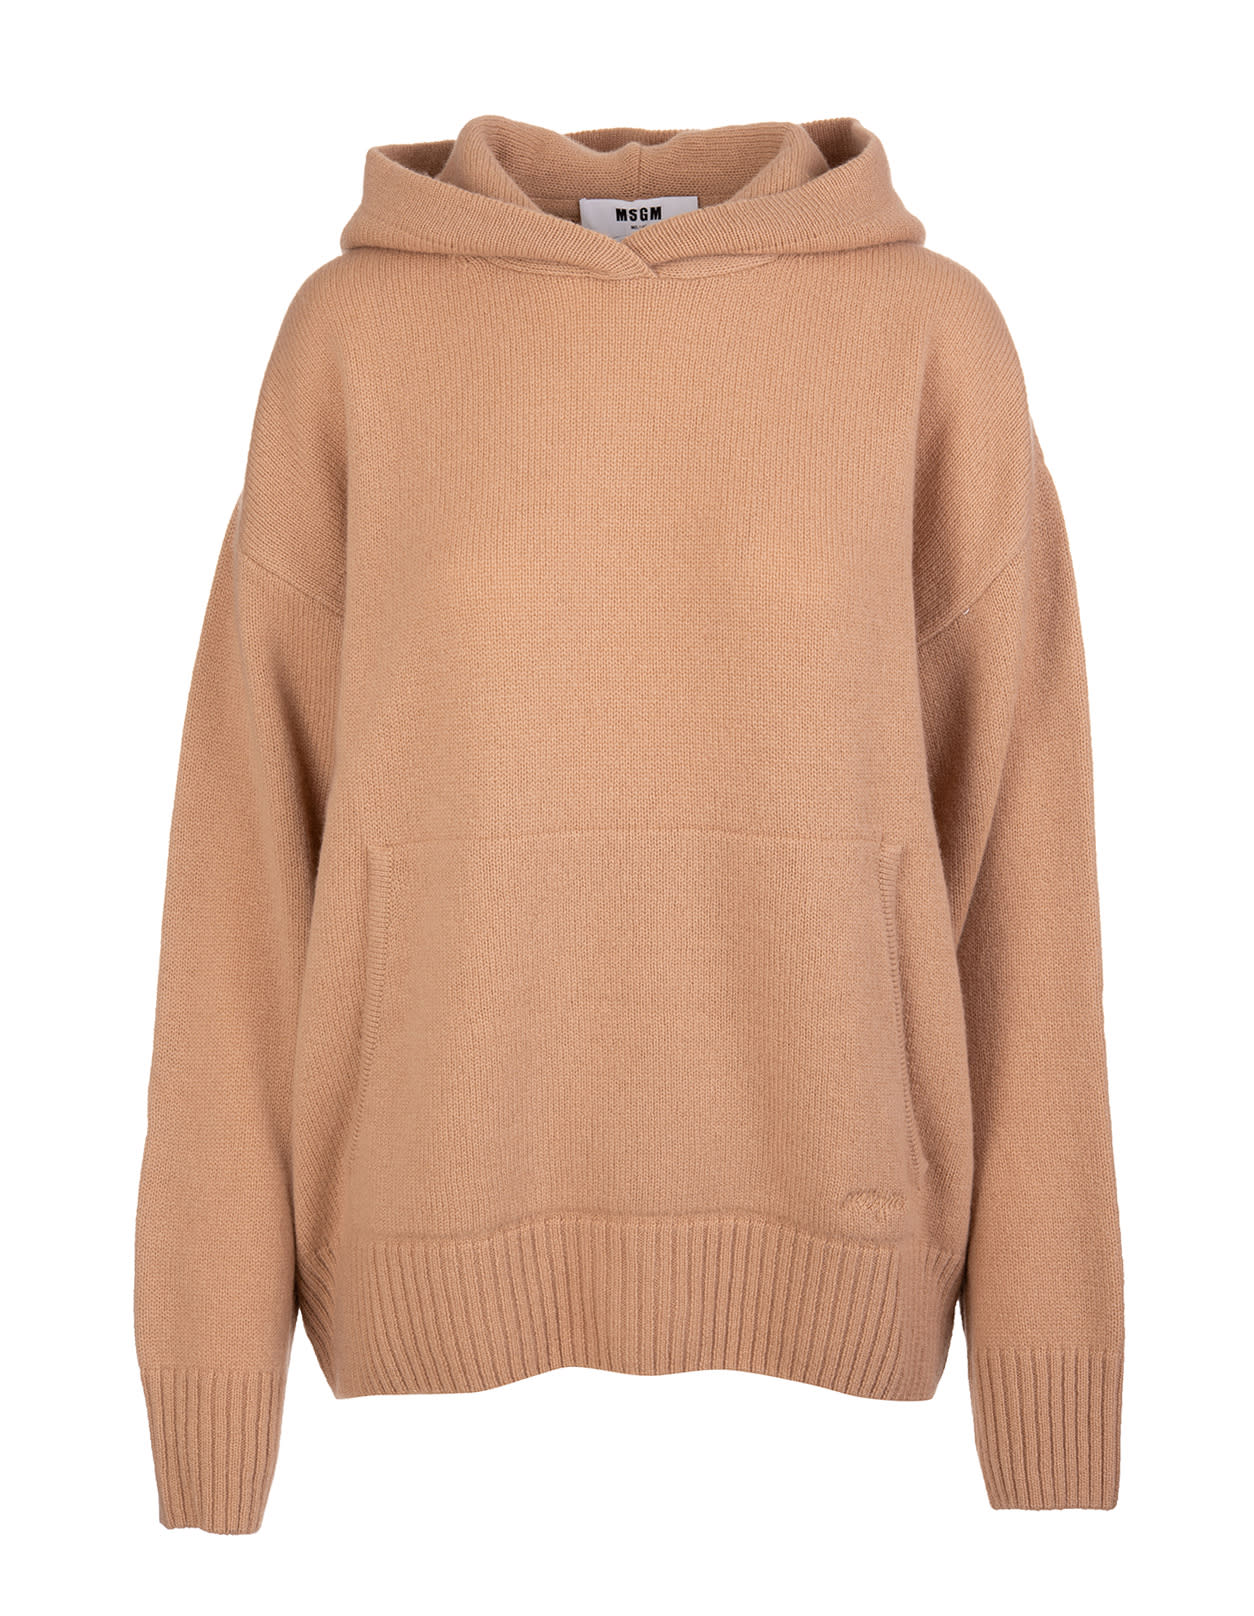 MSGM Woman Camel-colored Wool And Cashmere Hooded Sweater